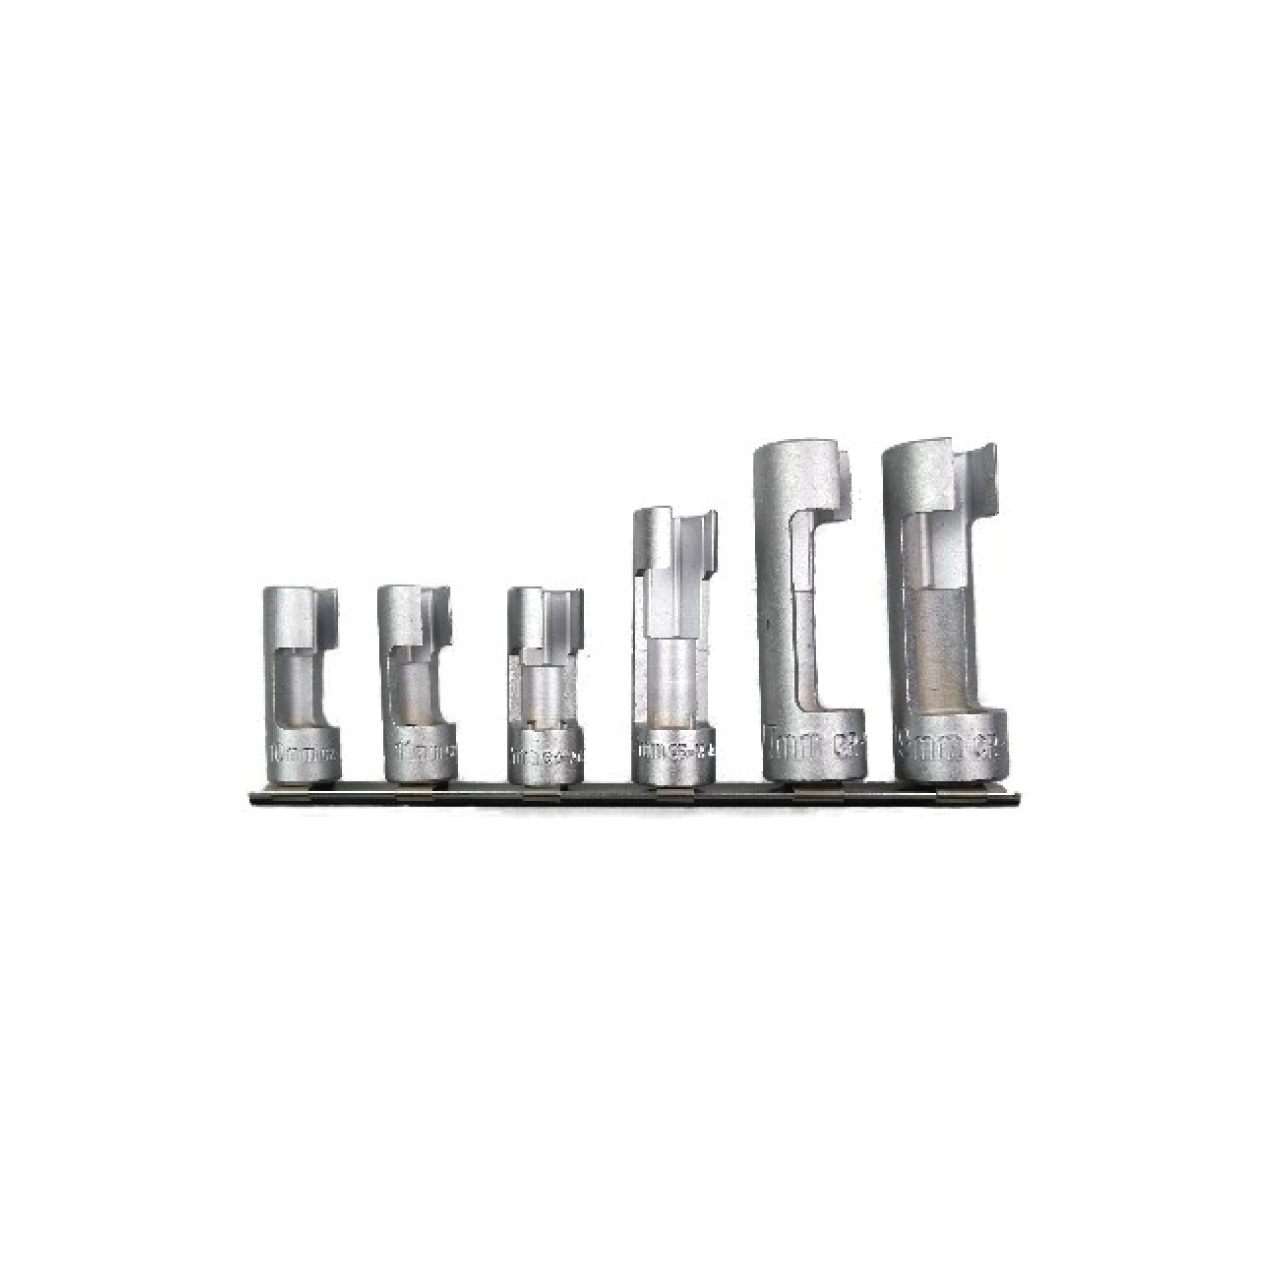  6-PIECE SLOTTED SPECIALl SOCKET SET